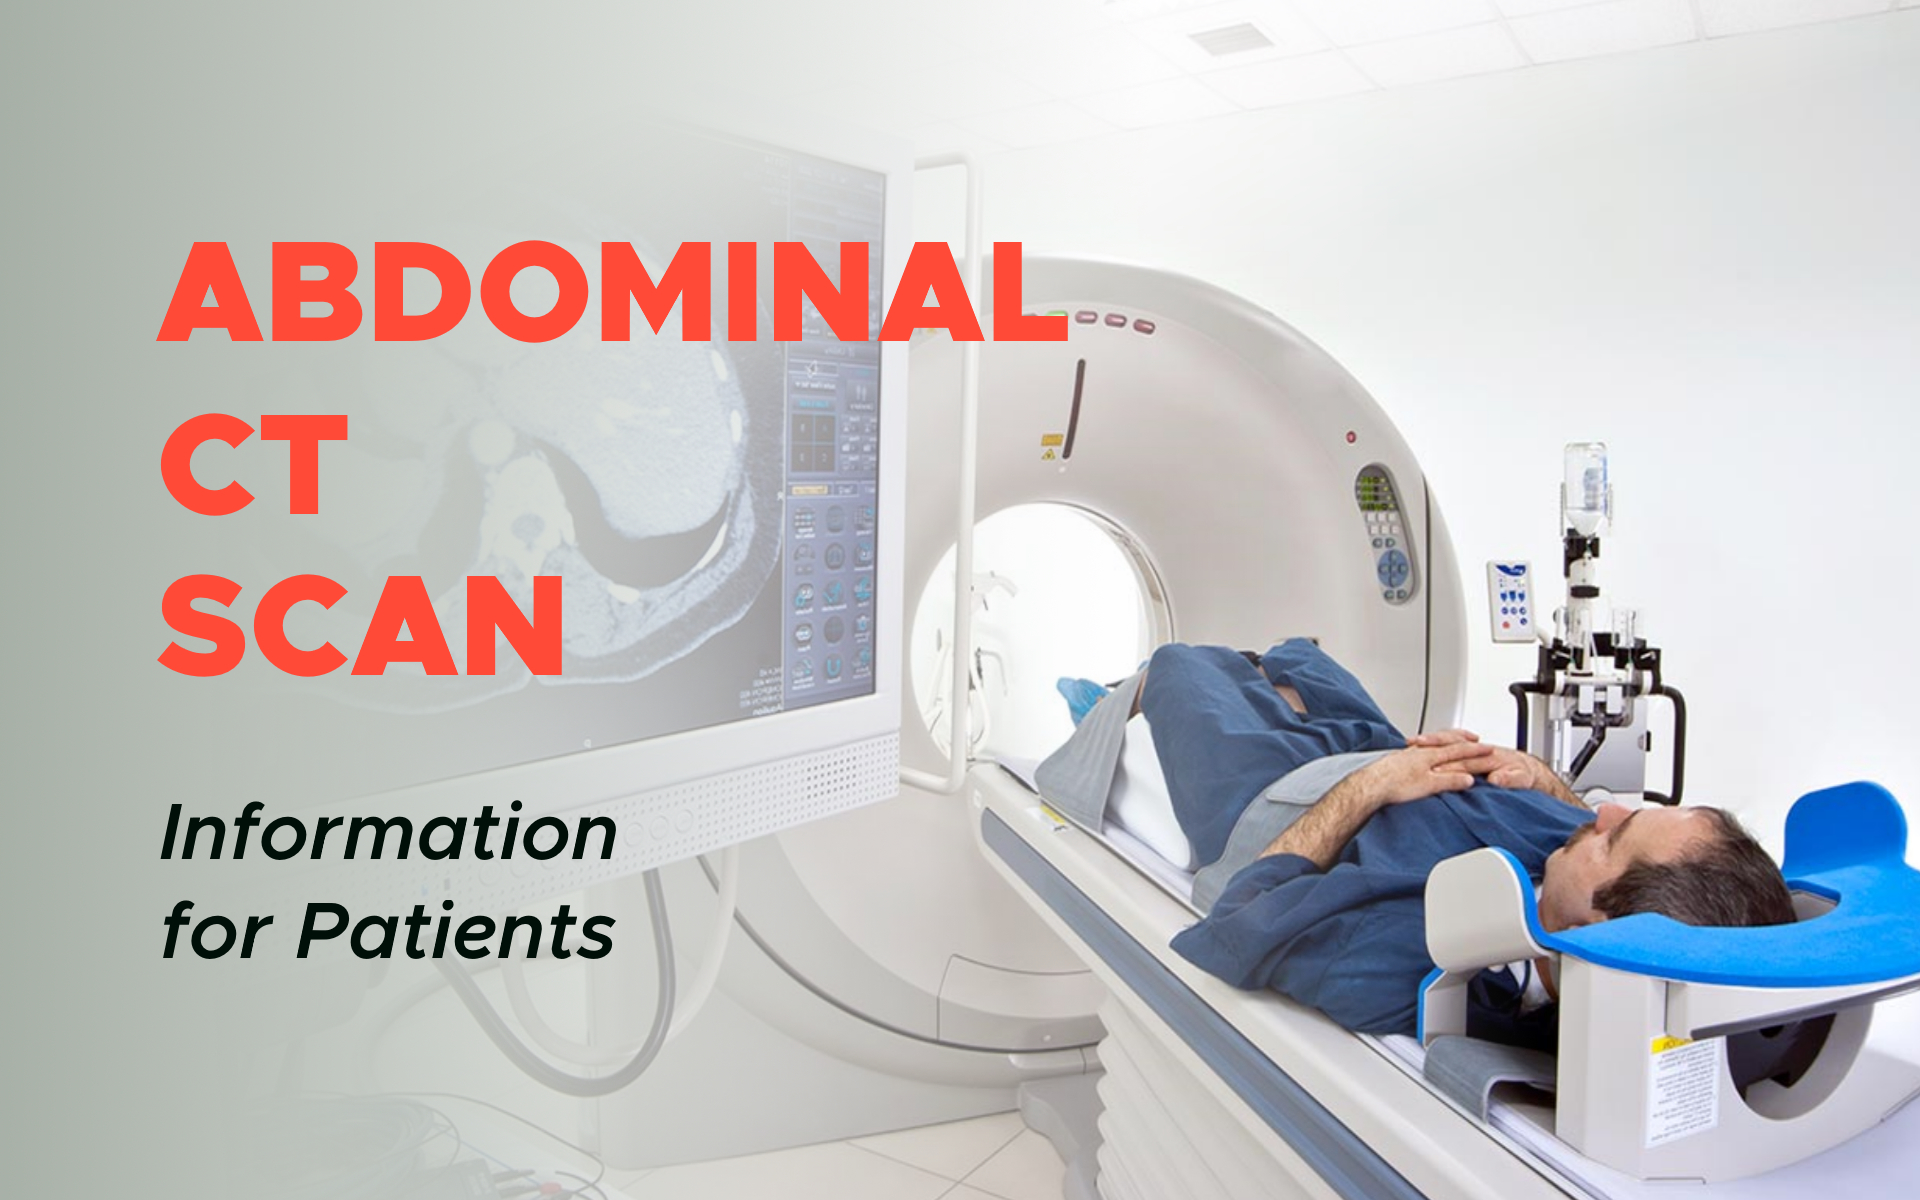 Abdominal CT Scan: Information for Patients